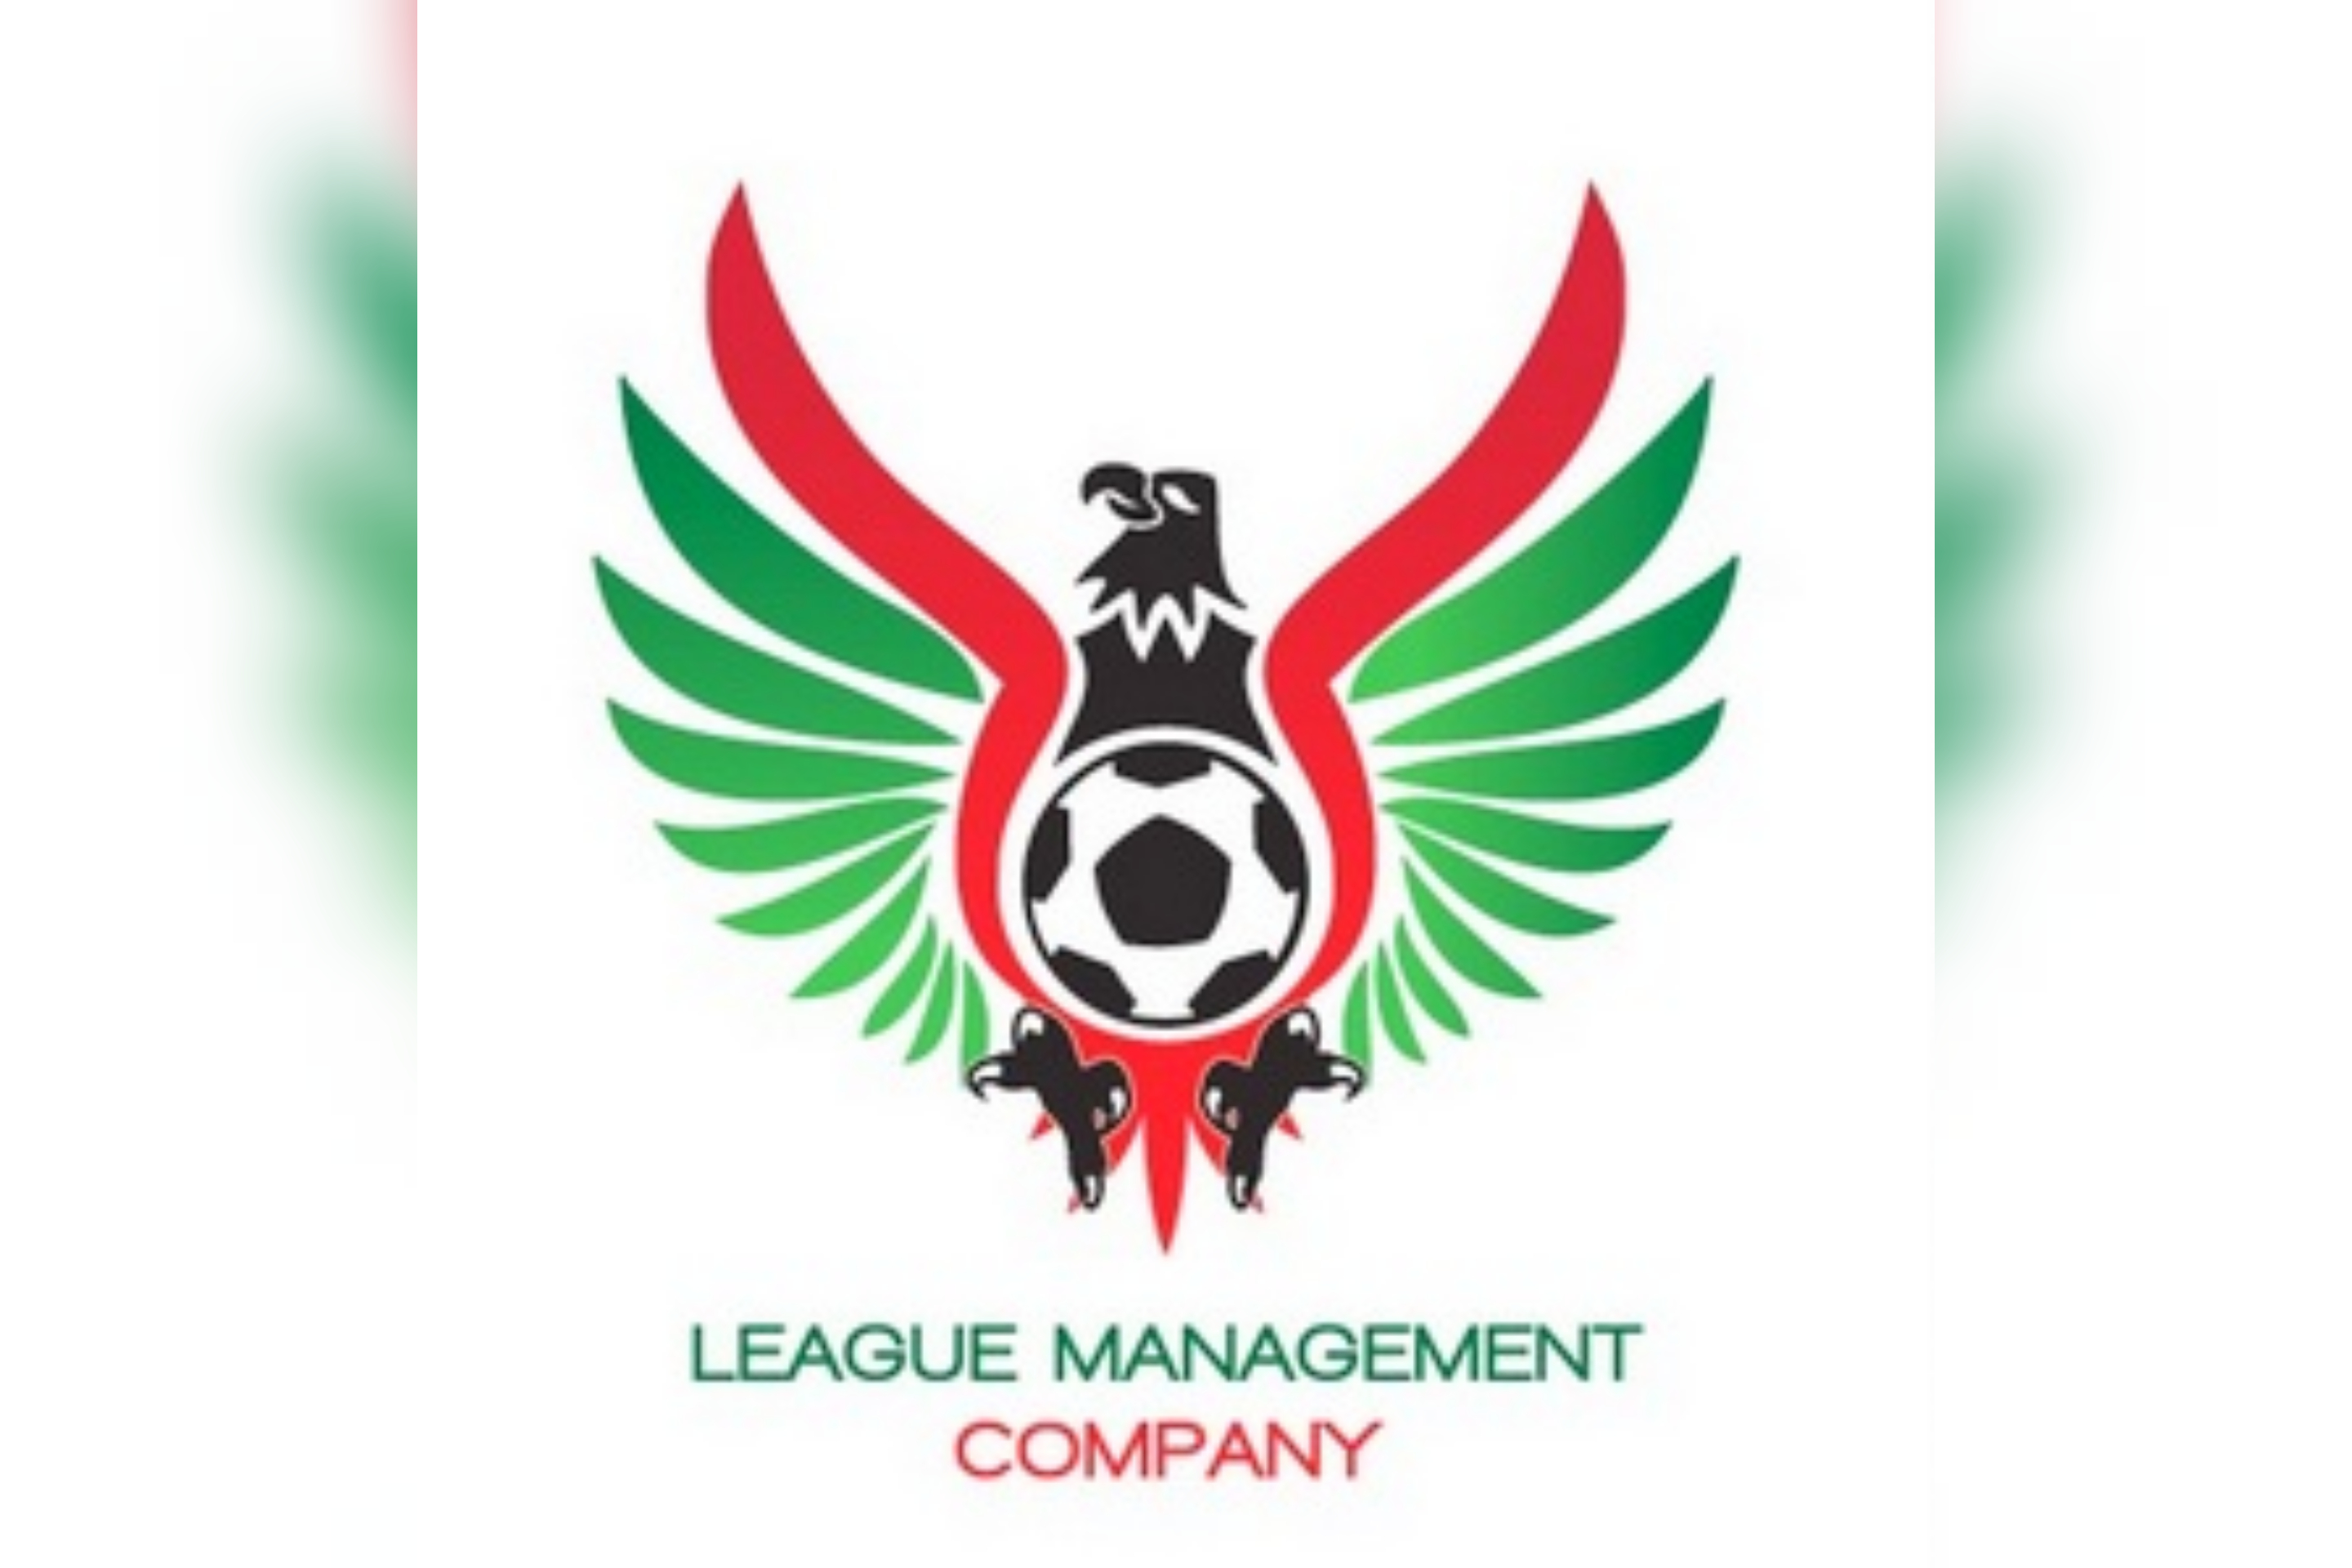 LMC Delay 3SC’s Relegation, Order Disrupted Gombe Vs Wikki Replayed